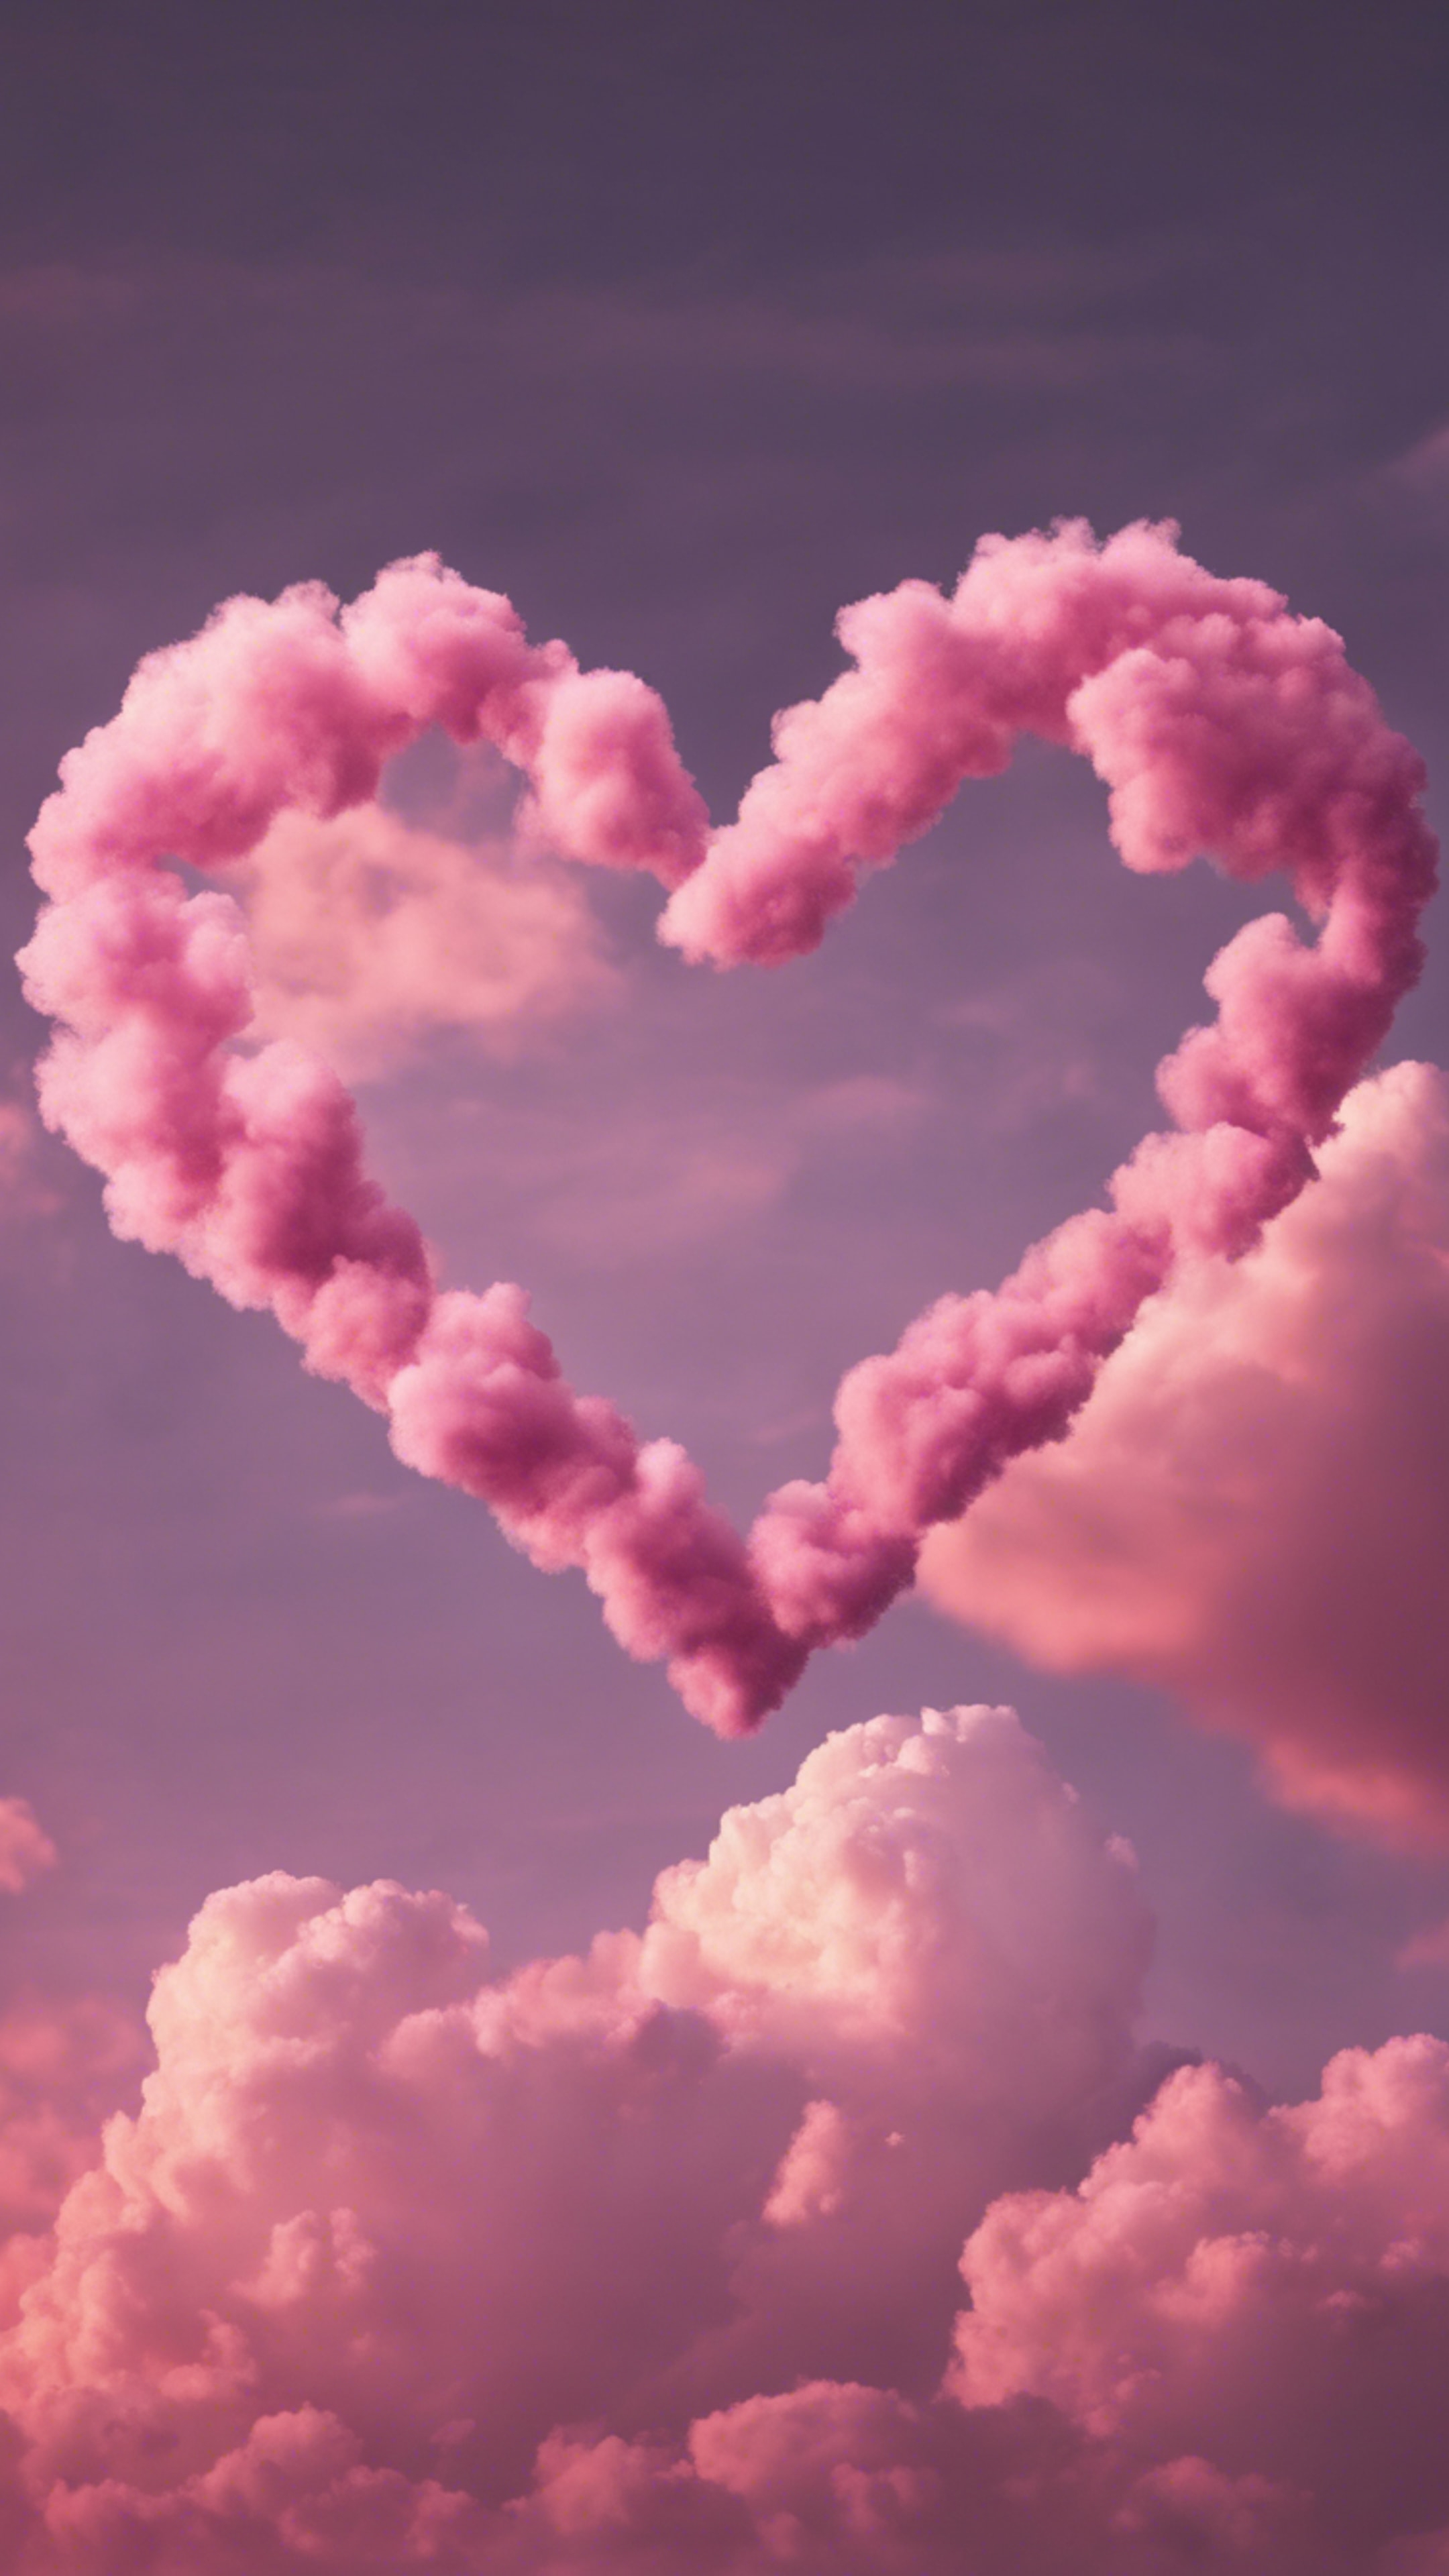 Pink heart-shaped clouds floating in the twilight sky. Tapeta[eb6690dc48484c9aa4c9]